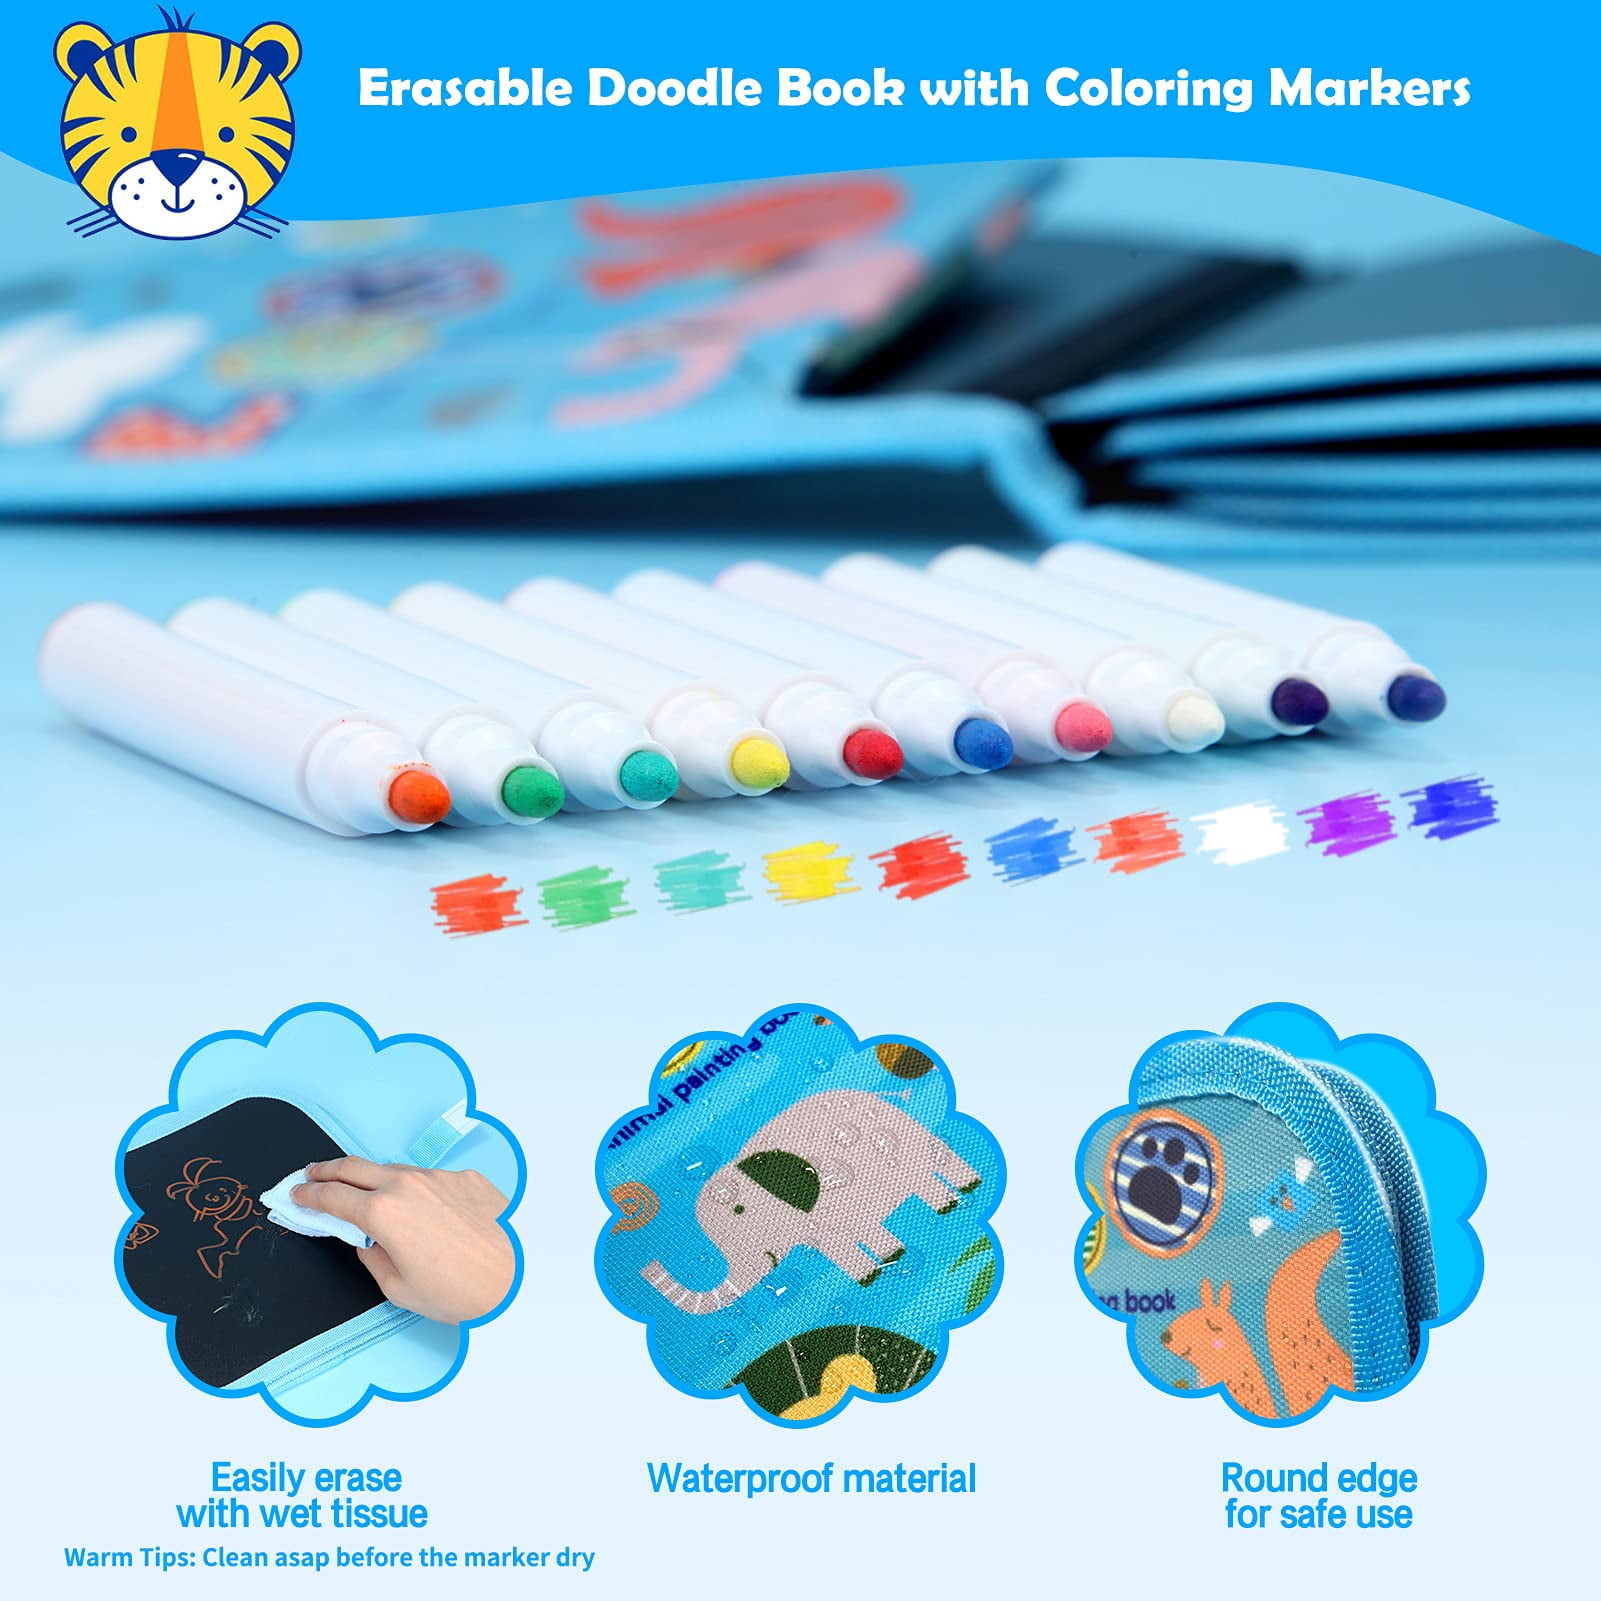 14 Pages Erasable Doodle Book For Kids - Toddler Activity Toy, Reusable Drawing  Pad With 12 Watercolor Pencils, Preschool Travel Art Toy, Road Trip Car  Play Writing And Drawing Set For Boys